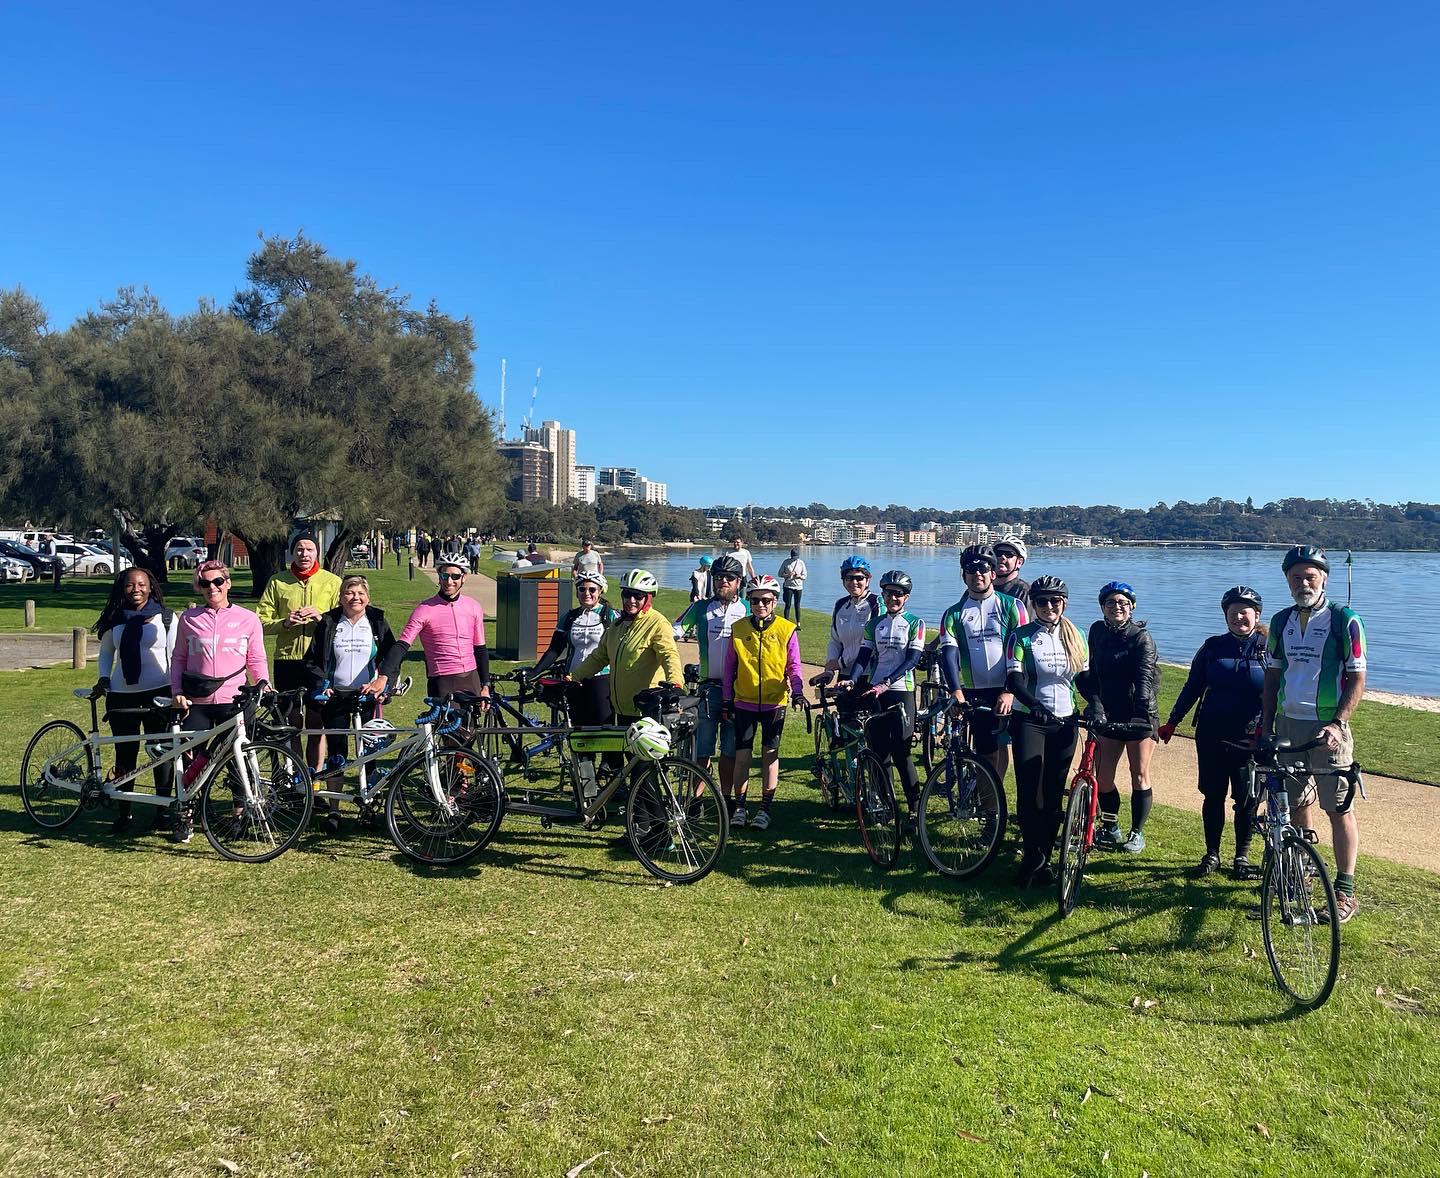 Nineteen people are standing on the South Perth foreshore with 9 tandems and a single bike lined up on the grass.  The group included 8 blind or vision-impaired stokers, two of whom enjoyed their first ride with WATCAC.